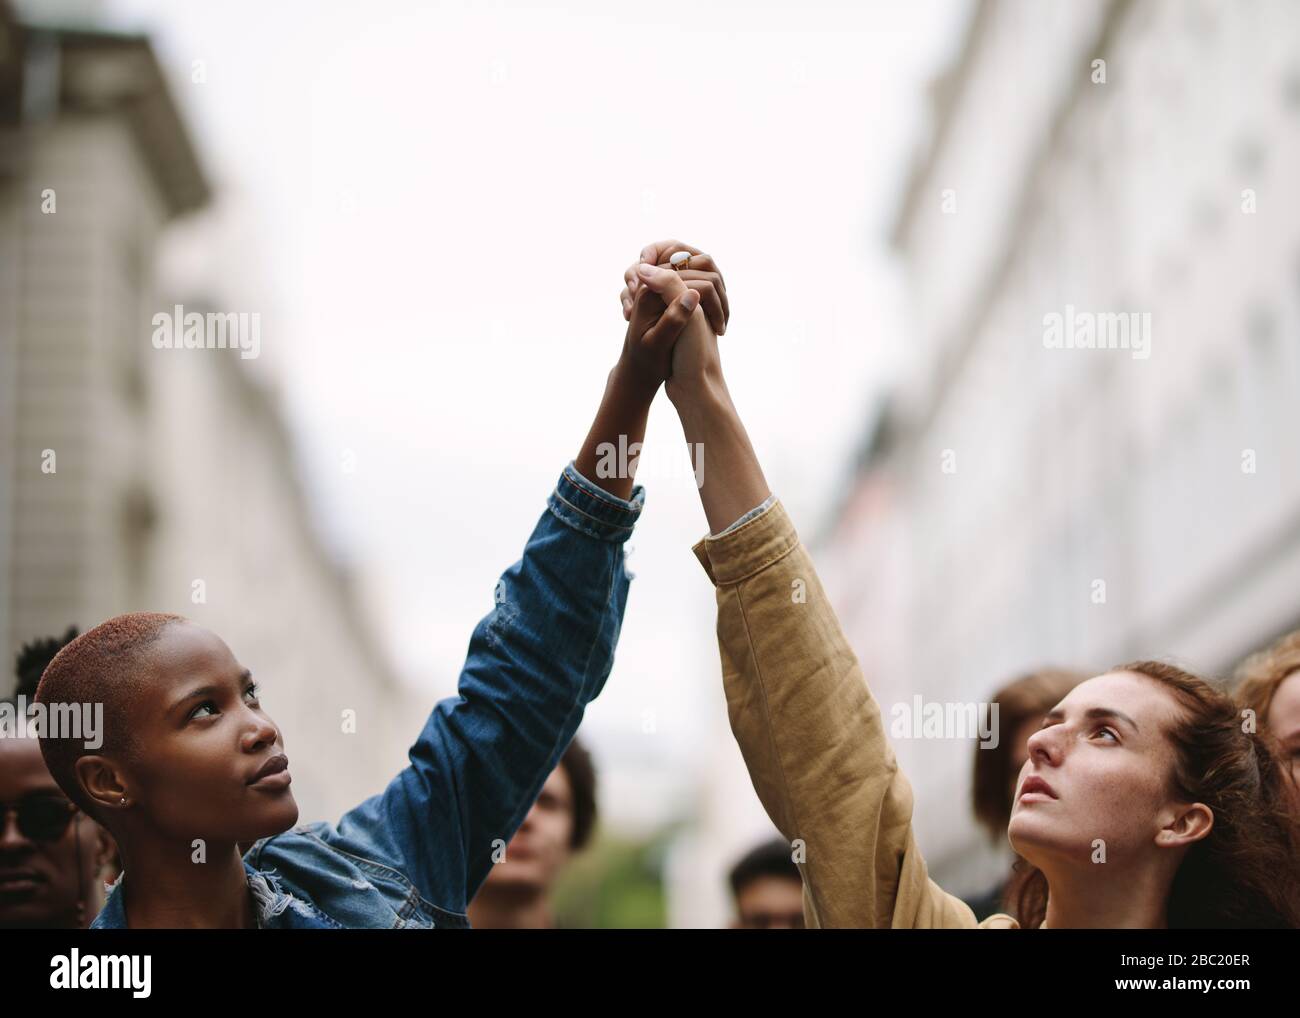 Two women activists holding hands and protesting. Protestors doing demonstration on the street holding hands. Stock Photo